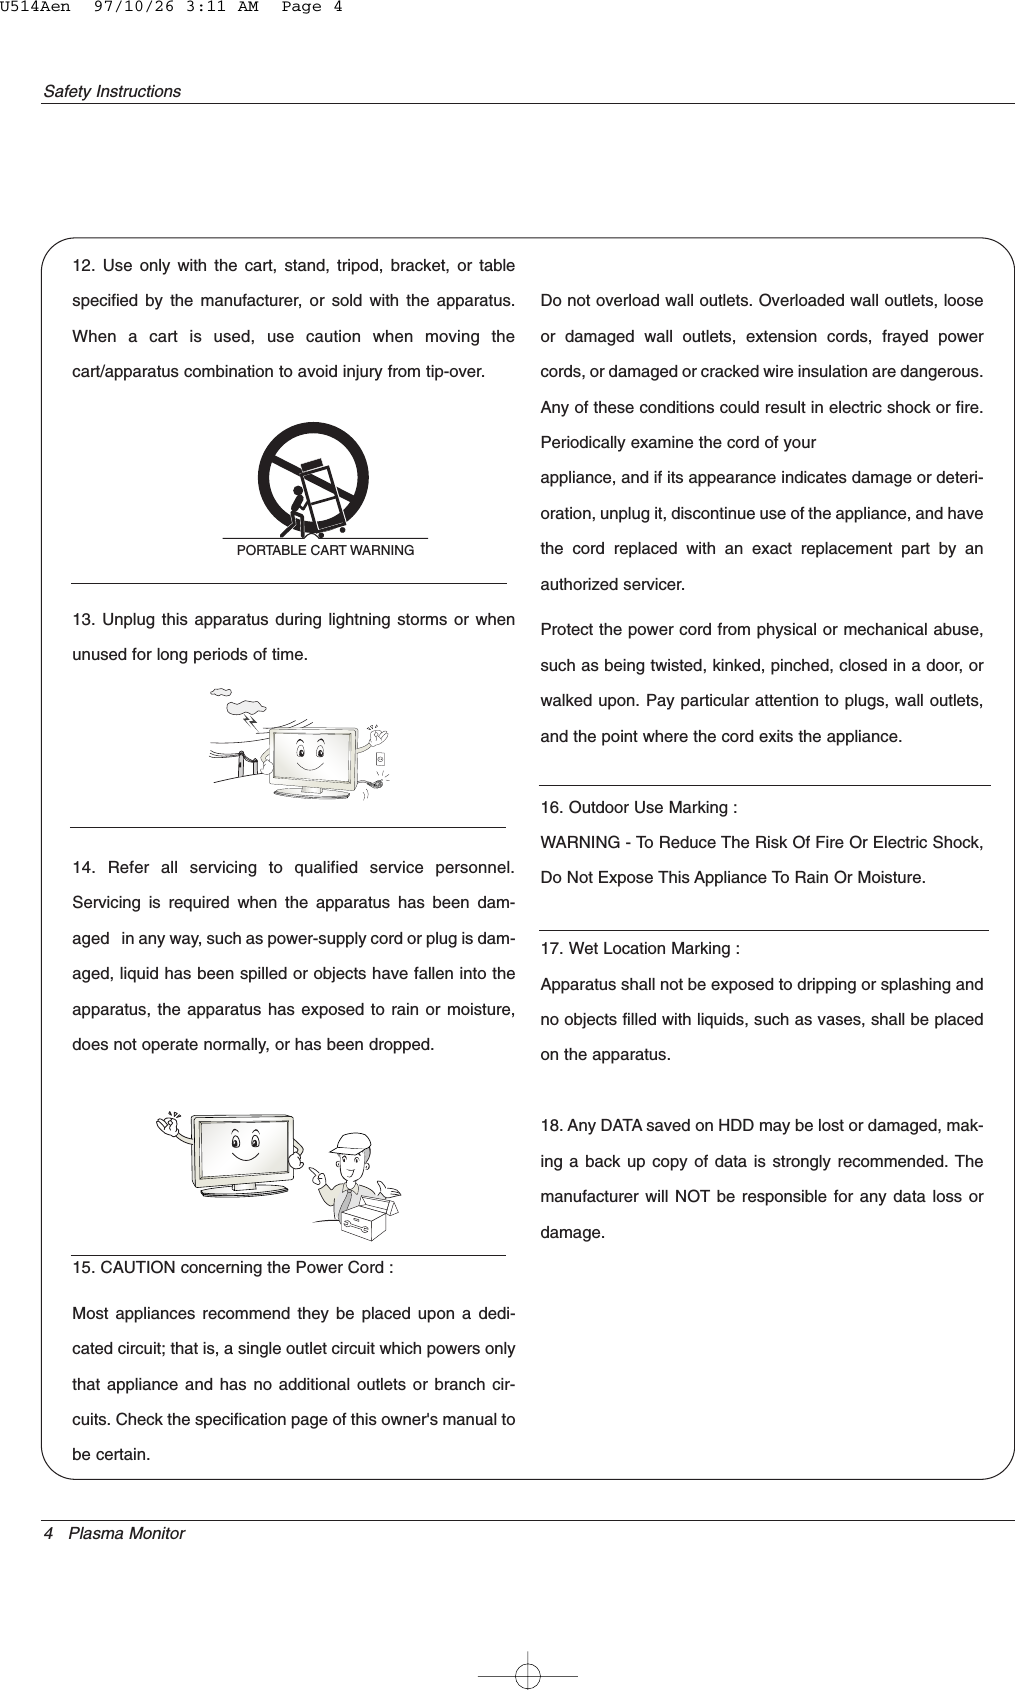 4 Plasma MonitorSafety Instructions12. Use only with the cart, stand, tripod, bracket, or tablespecified by the manufacturer, or sold with the apparatus.When a cart is used, use caution when moving thecart/apparatus combination to avoid injury from tip-over.13. Unplug this apparatus during lightning storms or whenunused for long periods of time.14. Refer all servicing to qualified service personnel.Servicing is required when the apparatus has been dam-aged   in any way, such as power-supply cord or plug is dam-aged, liquid has been spilled or objects have fallen into theapparatus, the apparatus has exposed to rain or moisture,does not operate normally, or has been dropped.15. CAUTION concerning the Power Cord :Most appliances recommend they be placed upon a dedi-cated circuit; that is, a single outlet circuit which powers onlythat appliance and has no additional outlets or branch cir-cuits. Check the specification page of this owner&apos;s manual tobe certain.Do not overload wall outlets. Overloaded wall outlets, looseor damaged wall outlets, extension cords, frayed powercords, or damaged or cracked wire insulation are dangerous.Any of these conditions could result in electric shock or fire.Periodically examine the cord of yourappliance, and if its appearance indicates damage or deteri-oration, unplug it, discontinue use of the appliance, and havethe cord replaced with an exact replacement part by anauthorized servicer.Protect the power cord from physical or mechanical abuse,such as being twisted, kinked, pinched, closed in a door, orwalked upon. Pay particular attention to plugs, wall outlets,and the point where the cord exits the appliance.16. Outdoor Use Marking :WARNING - To Reduce The Risk Of Fire Or Electric Shock,Do Not Expose This Appliance To Rain Or Moisture.17. Wet Location Marking :Apparatus shall not be exposed to dripping or splashing andno objects filled with liquids, such as vases, shall be placedon the apparatus.18. Any DATA saved on HDD may be lost or damaged, mak-ing a back up copy of data is strongly recommended. Themanufacturer will NOT be responsible for any data loss ordamage.PORTABLE CART WARNINGU514Aen  97/10/26 3:11 AM  Page 4